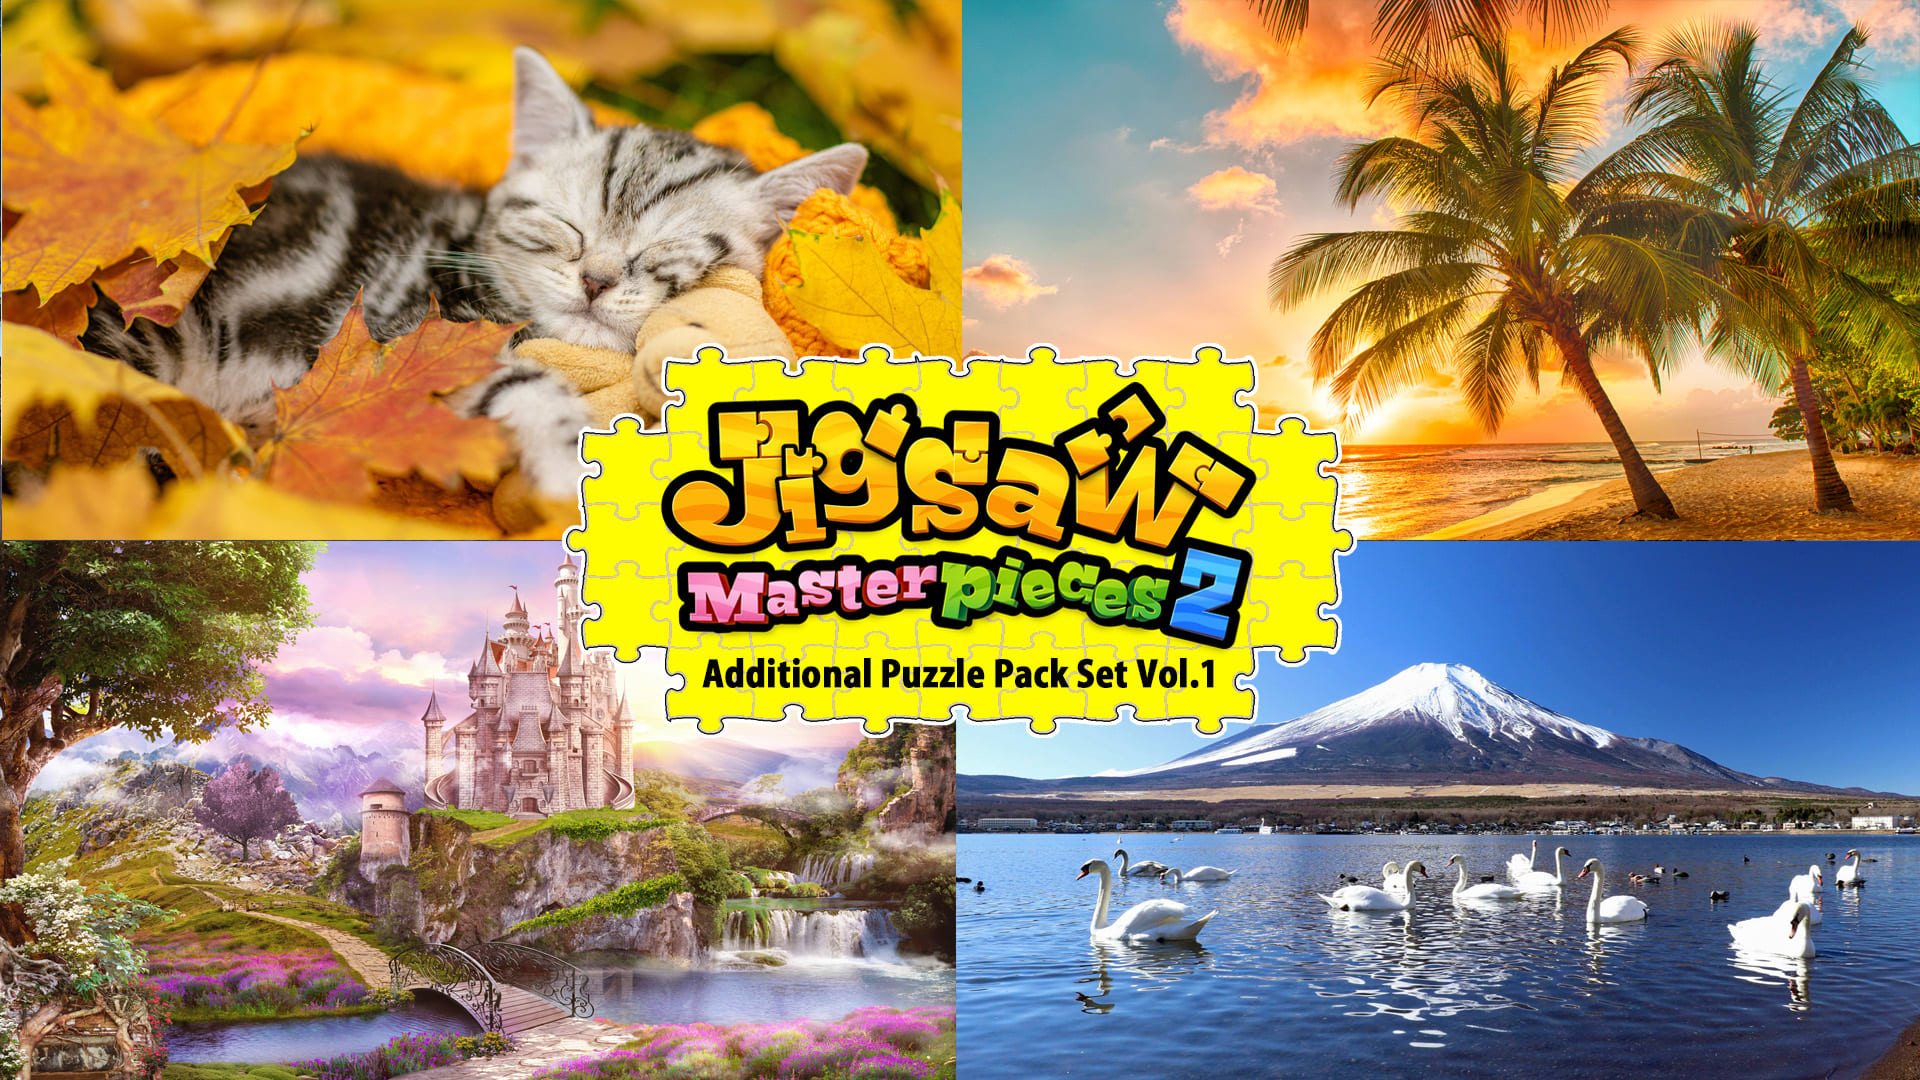 Additional Puzzle Pack Set Vol.1 1